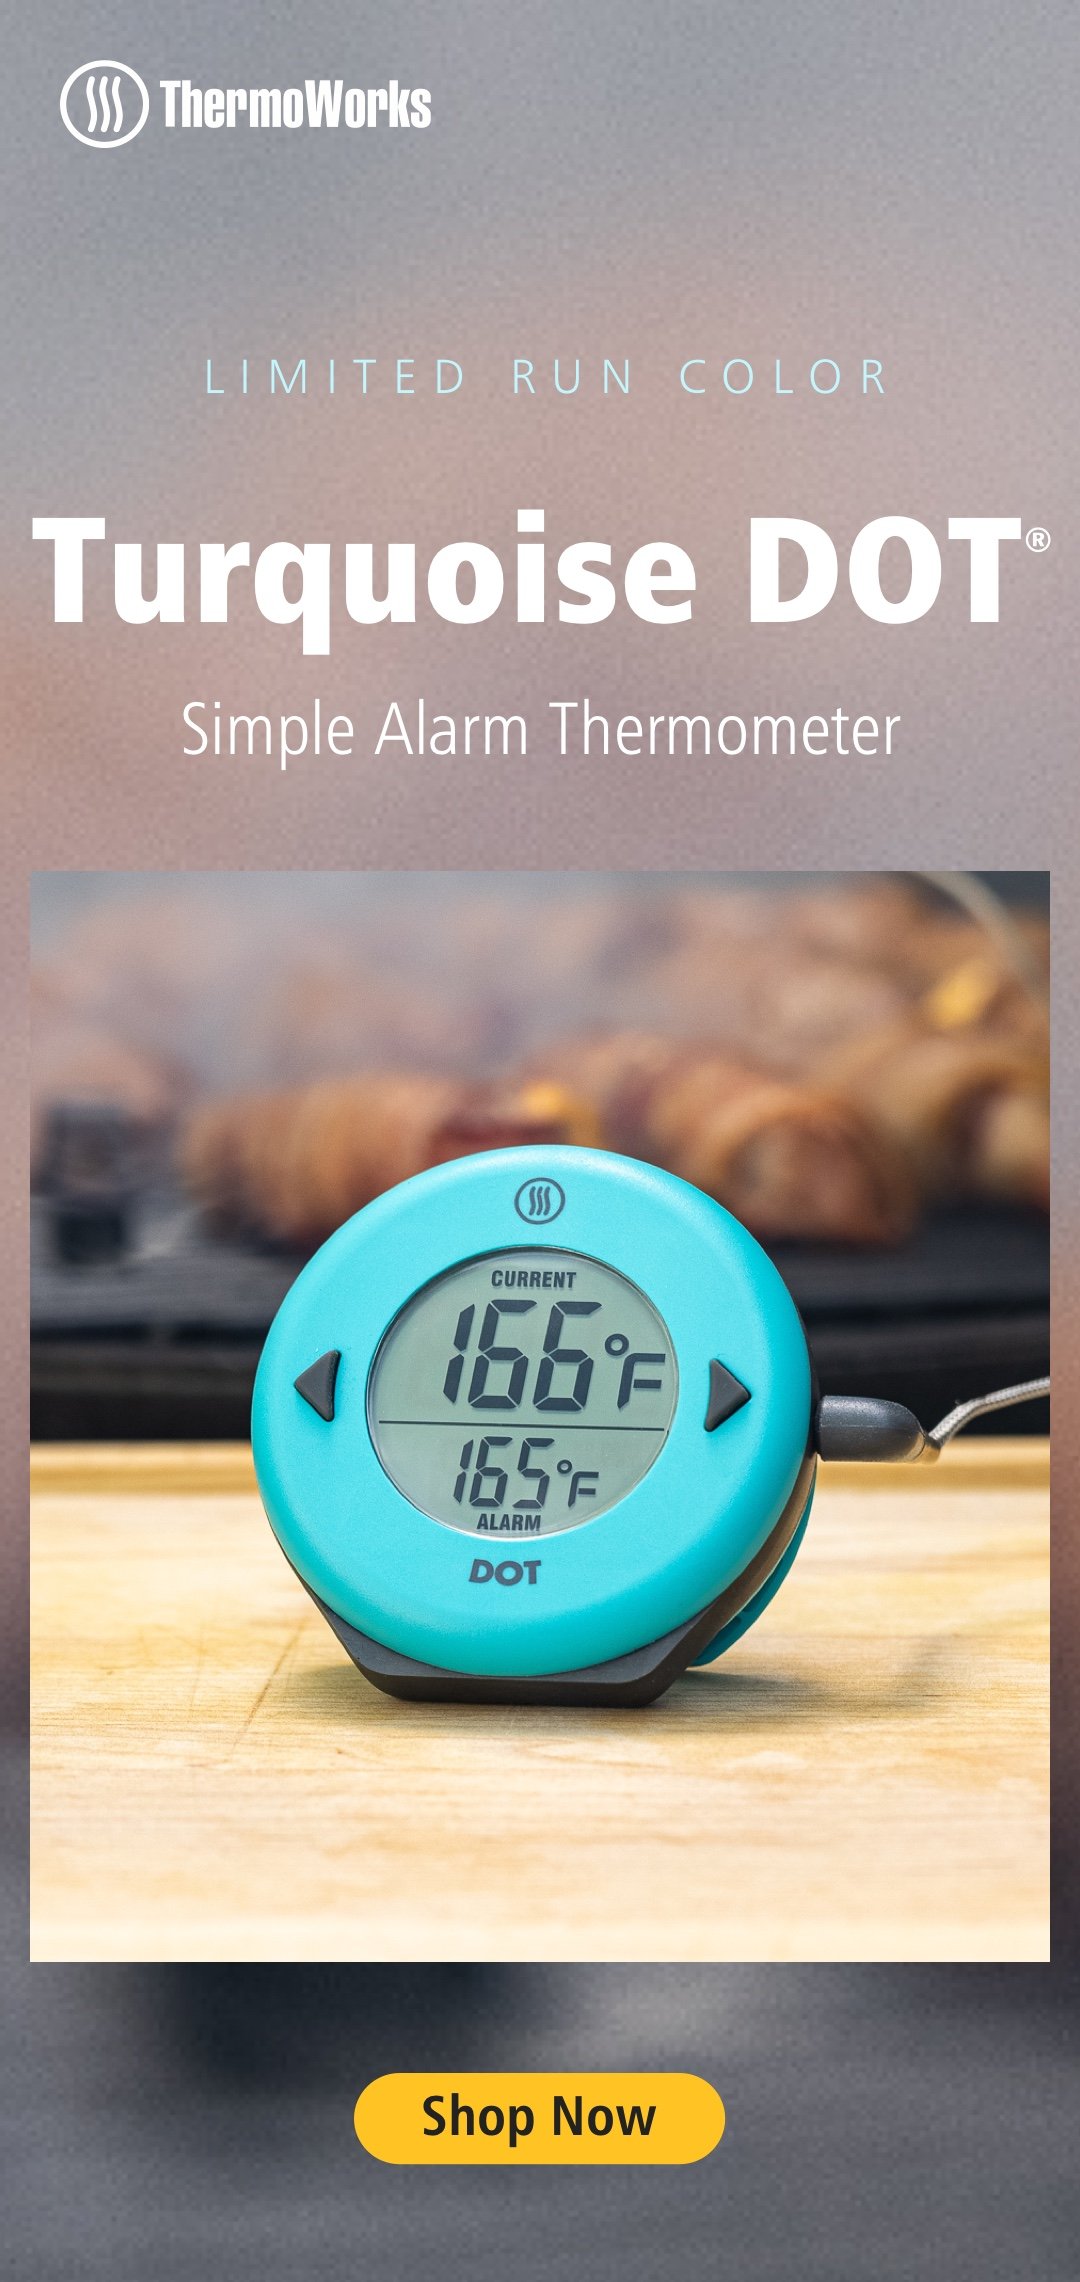 DOT Simple Alarm Thermometer